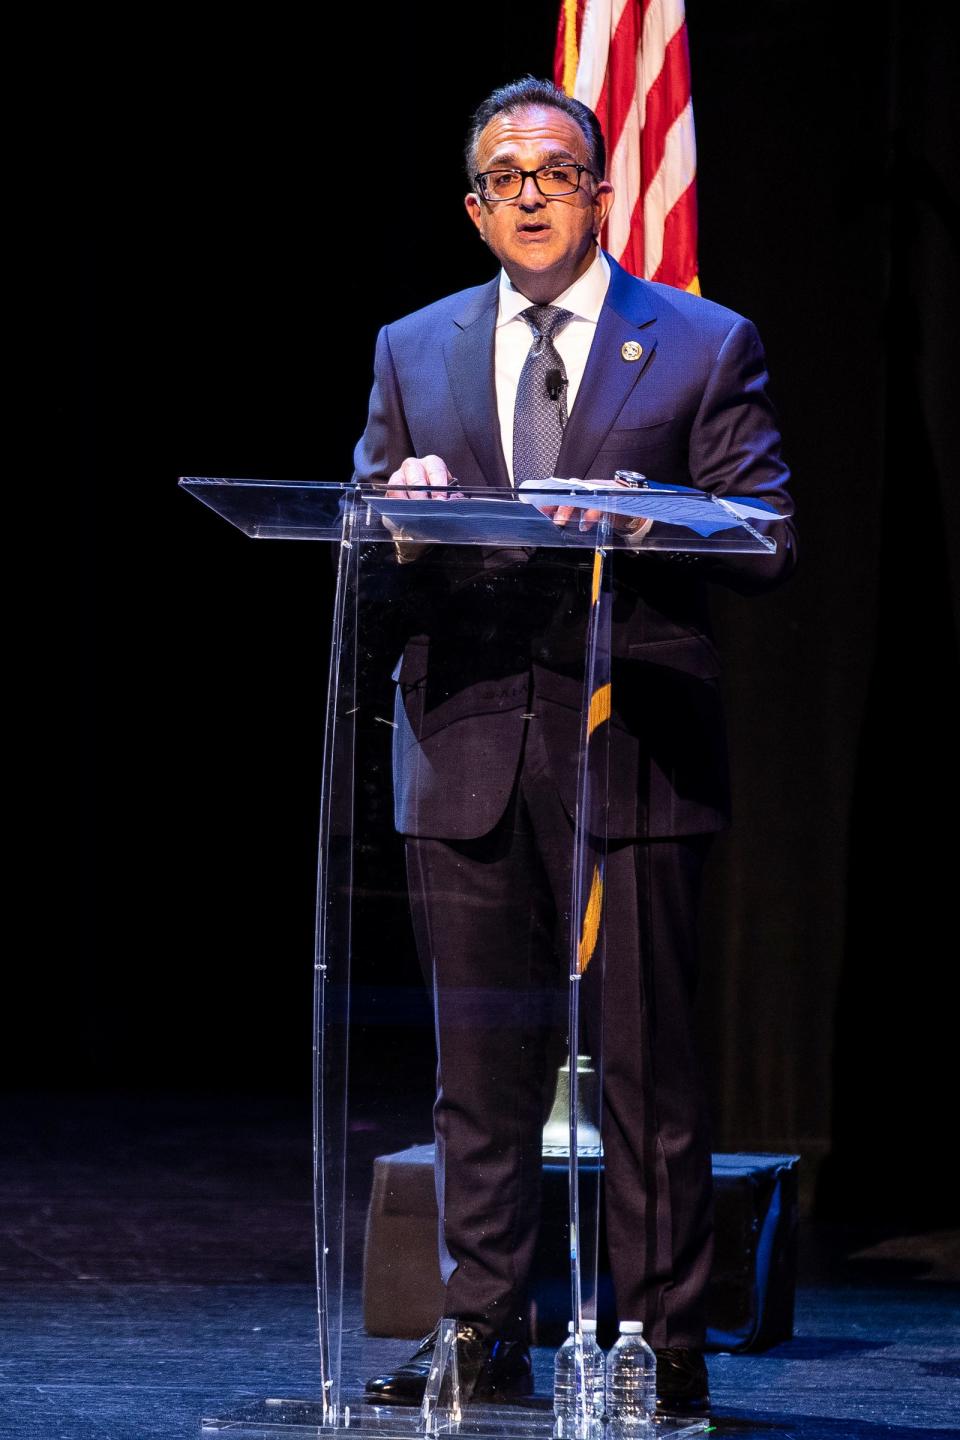 Council president Mike Sareini speaks during the State of the City address at Ford Community and Performing Arts Center in Dearborn on Tuesday, May 23, 2023.